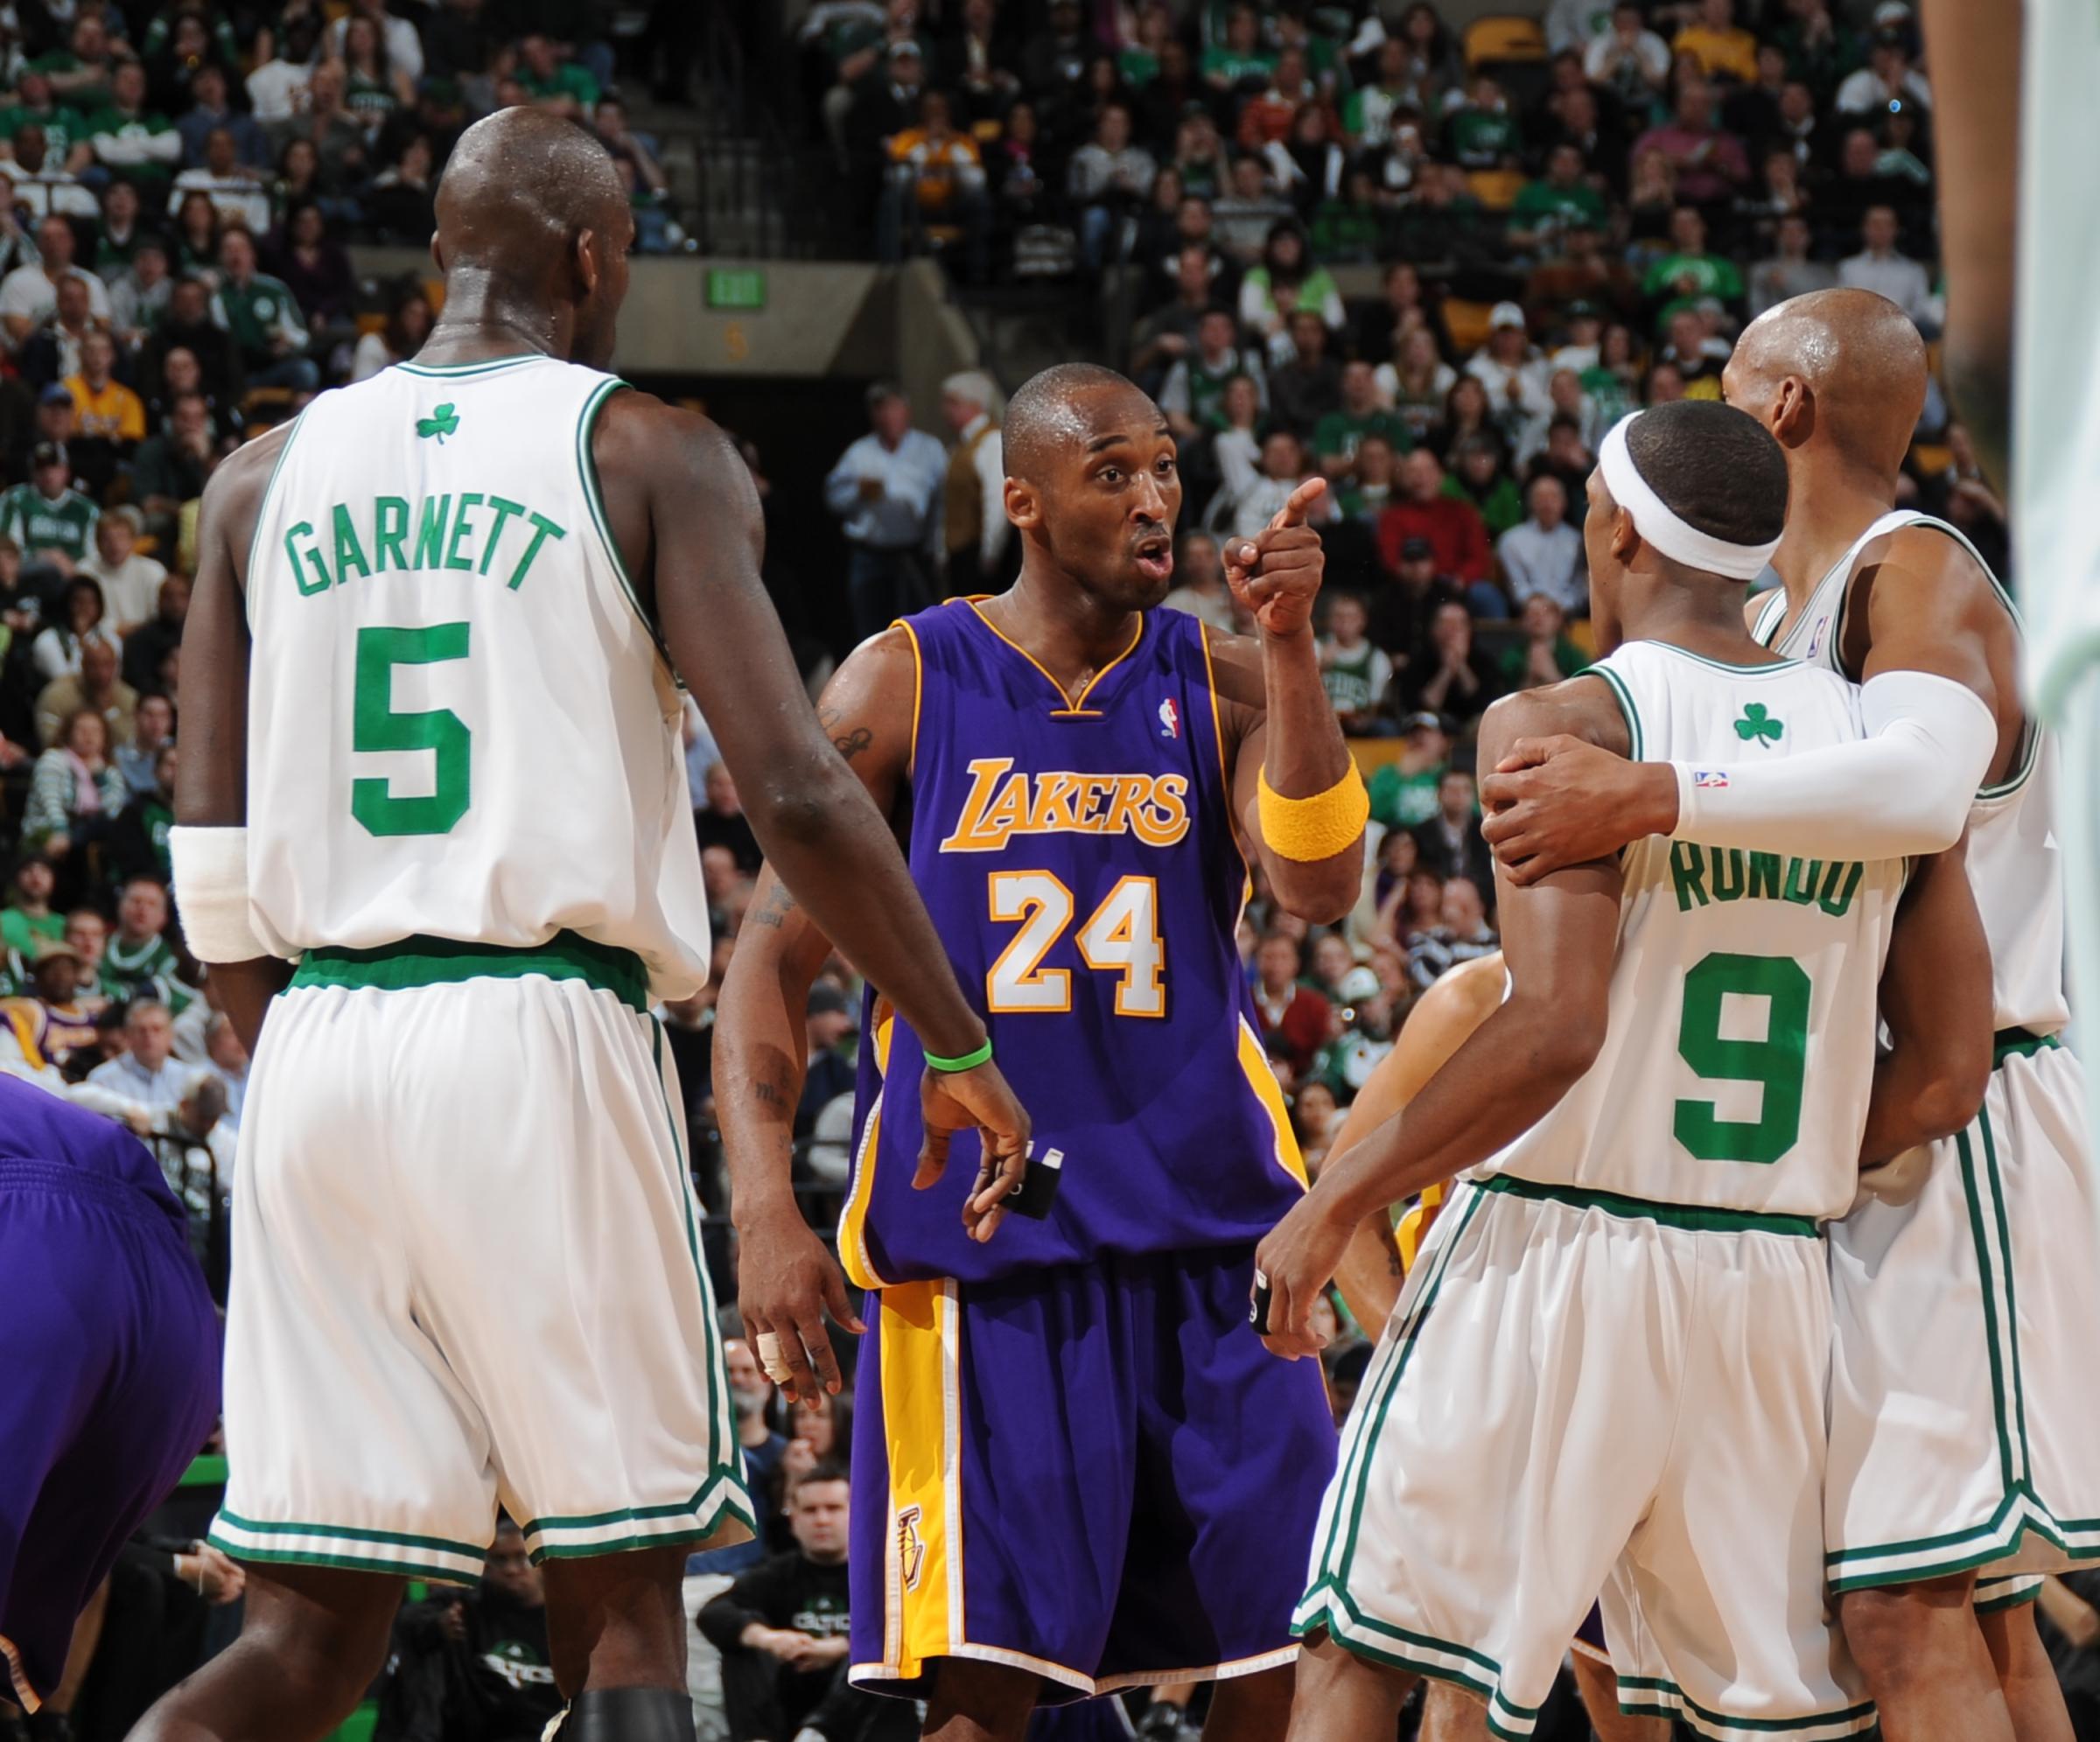 Los Angeles Lakers' Kobe Bryant (24) argues with Boston Celtics' Rajon Rondo (9) during an NBA basketball game on Feb. 5, 2009 at the TD Banknorth Garden in Boston.